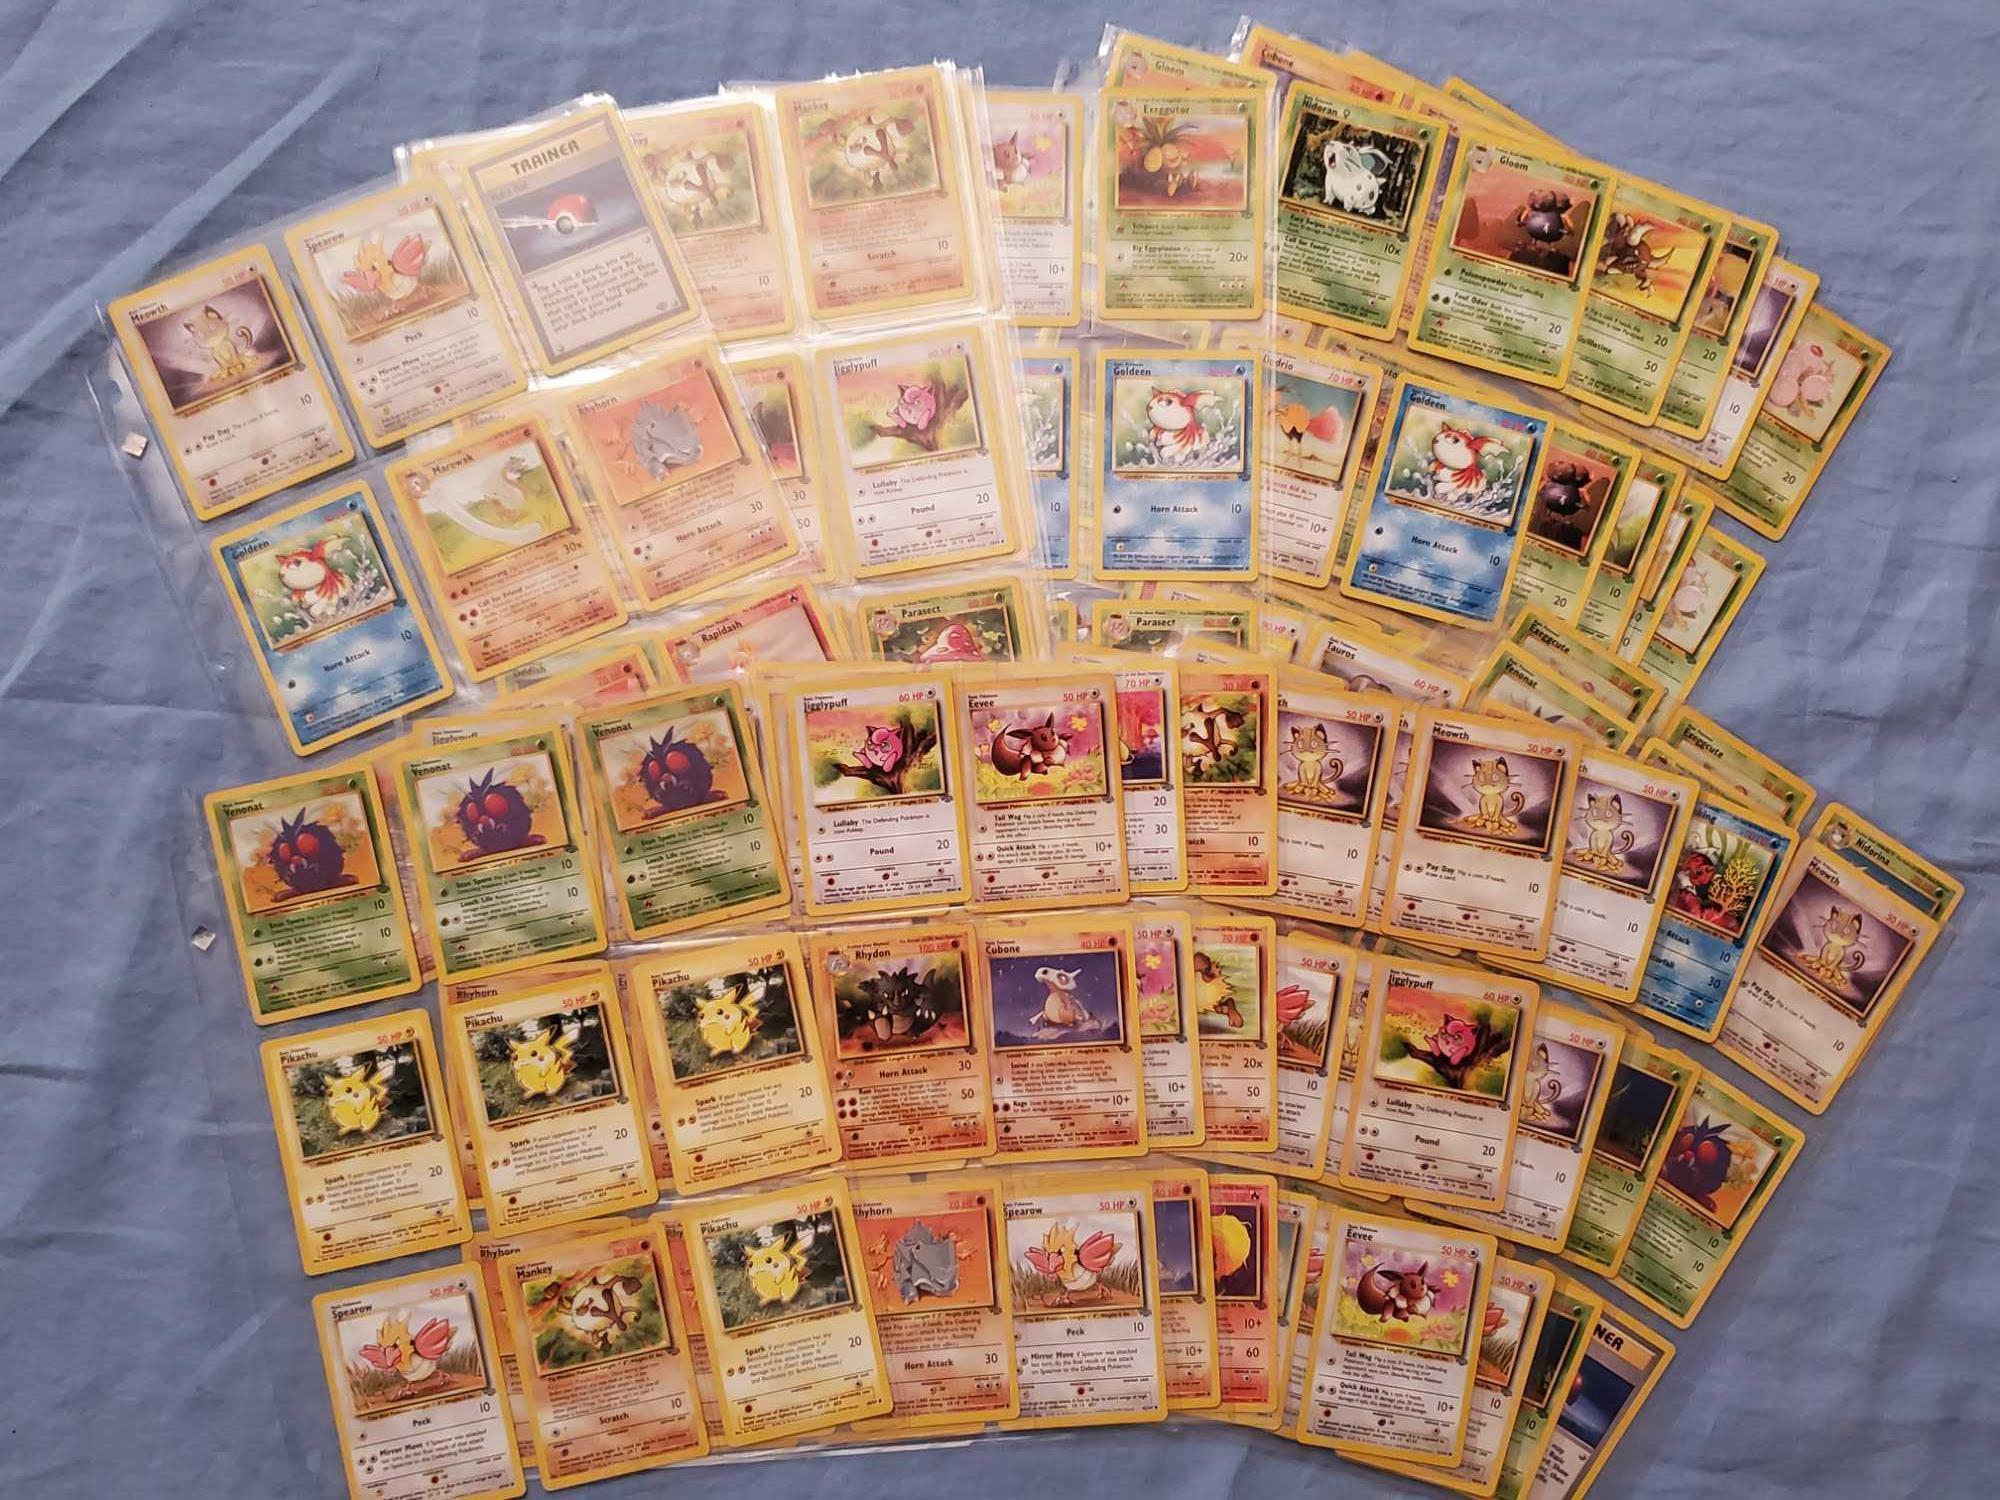 Album of 1999-2000 Pokemon Cards - Base, Jungle, Fossil, and Team Rocket